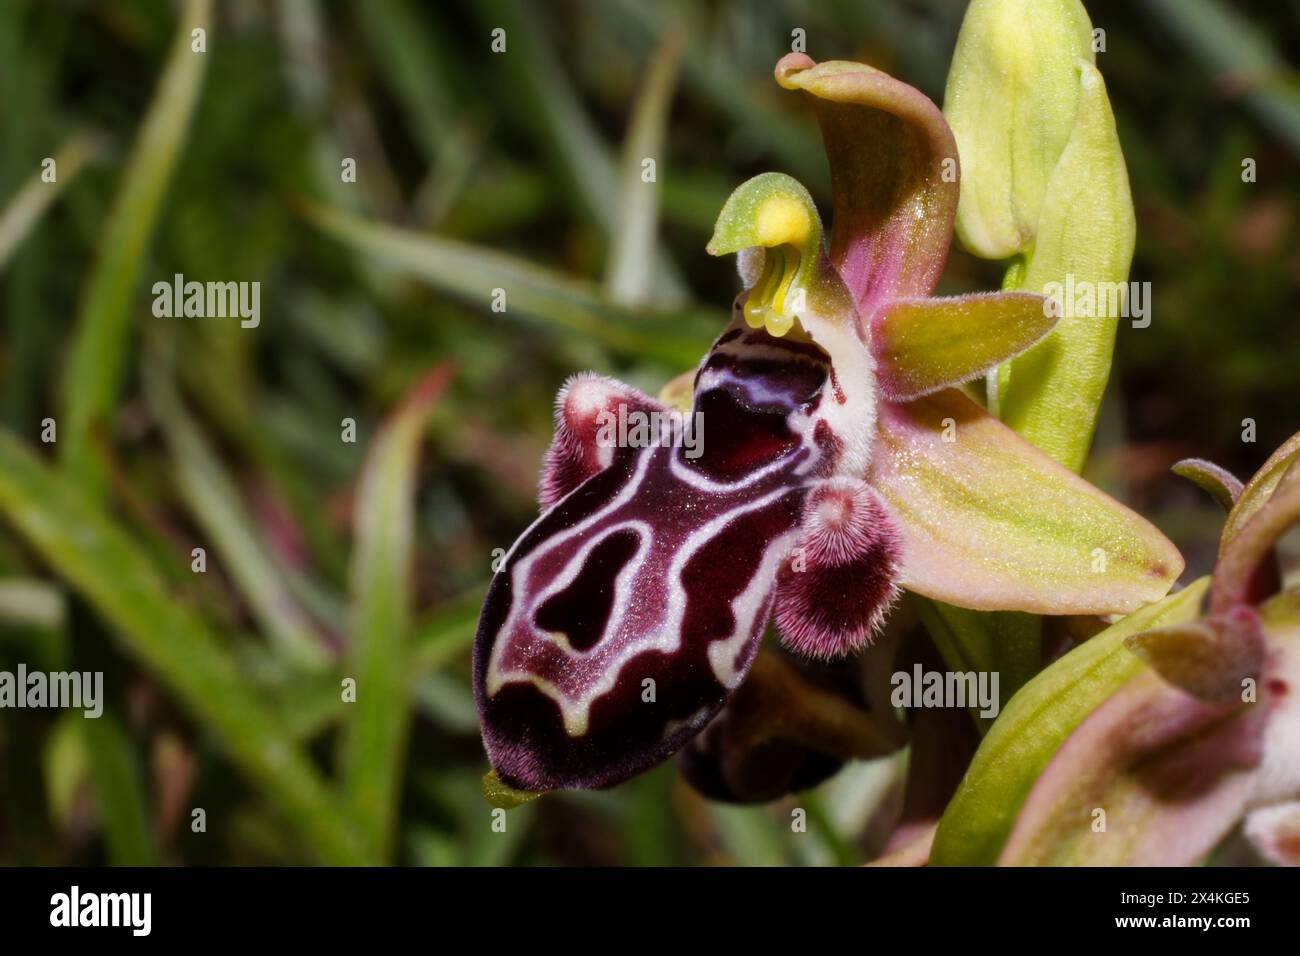 Flower of the Cyprus bee orchid (Ophrys kotschyi), in natural habitat on Cyprus Stock Photo